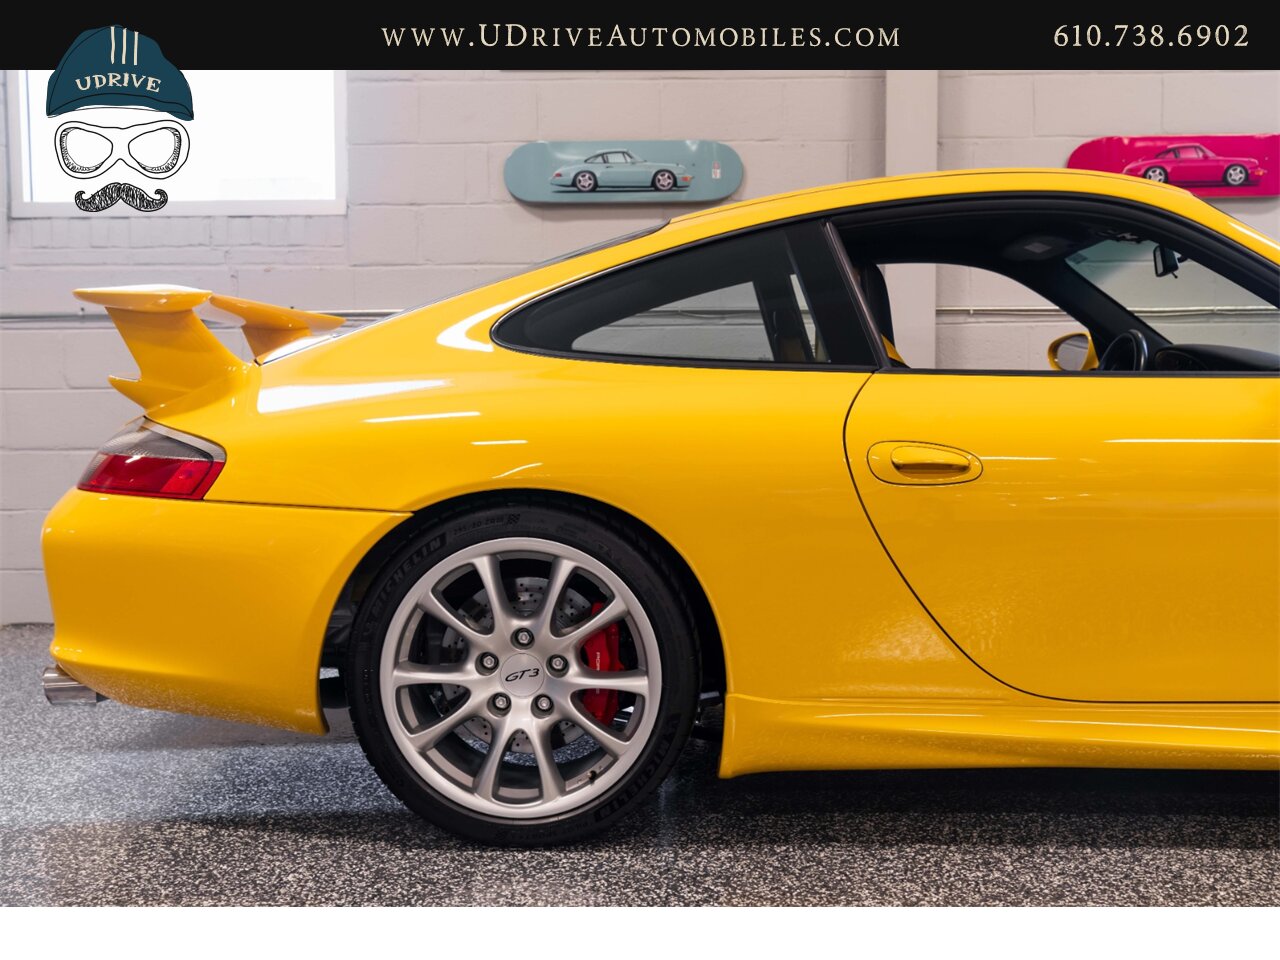 2005 Porsche 911 GT3 996 Speed Yellow Sport Seats Pntd Hardbacks  Pntd Console Deviating Stitch Yellow Accents Throughout - Photo 19 - West Chester, PA 19382